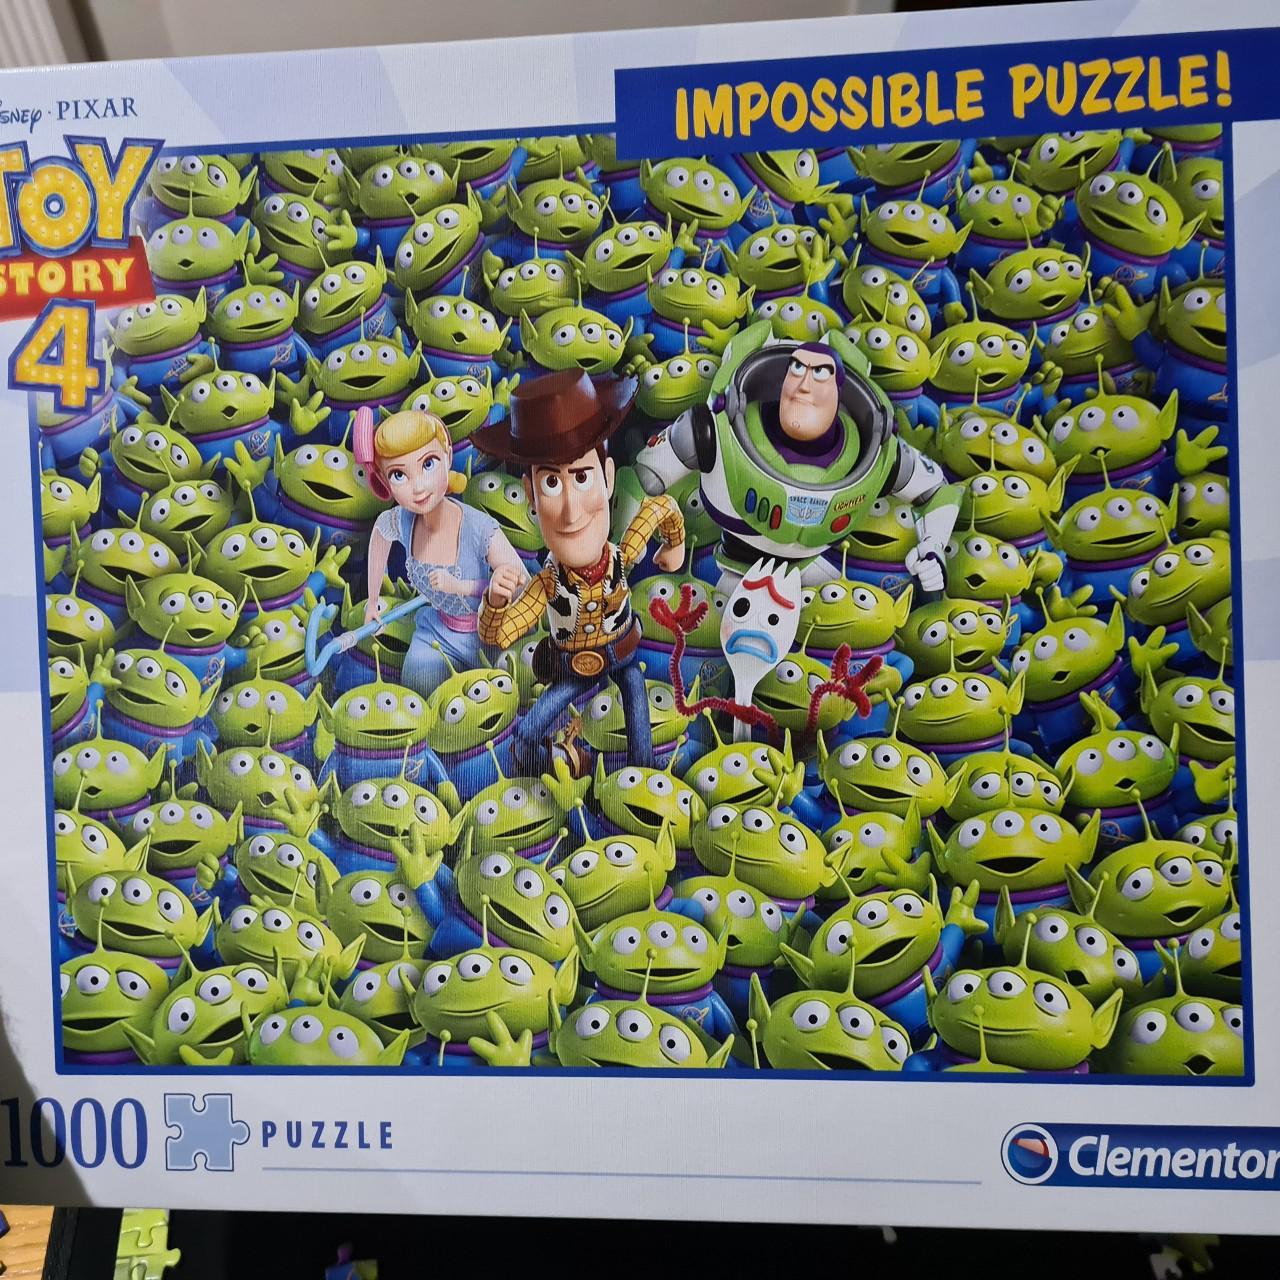 Impossible Puzzle 1000pc Jigsaw Puzzle Clementoni Toy Story 4 